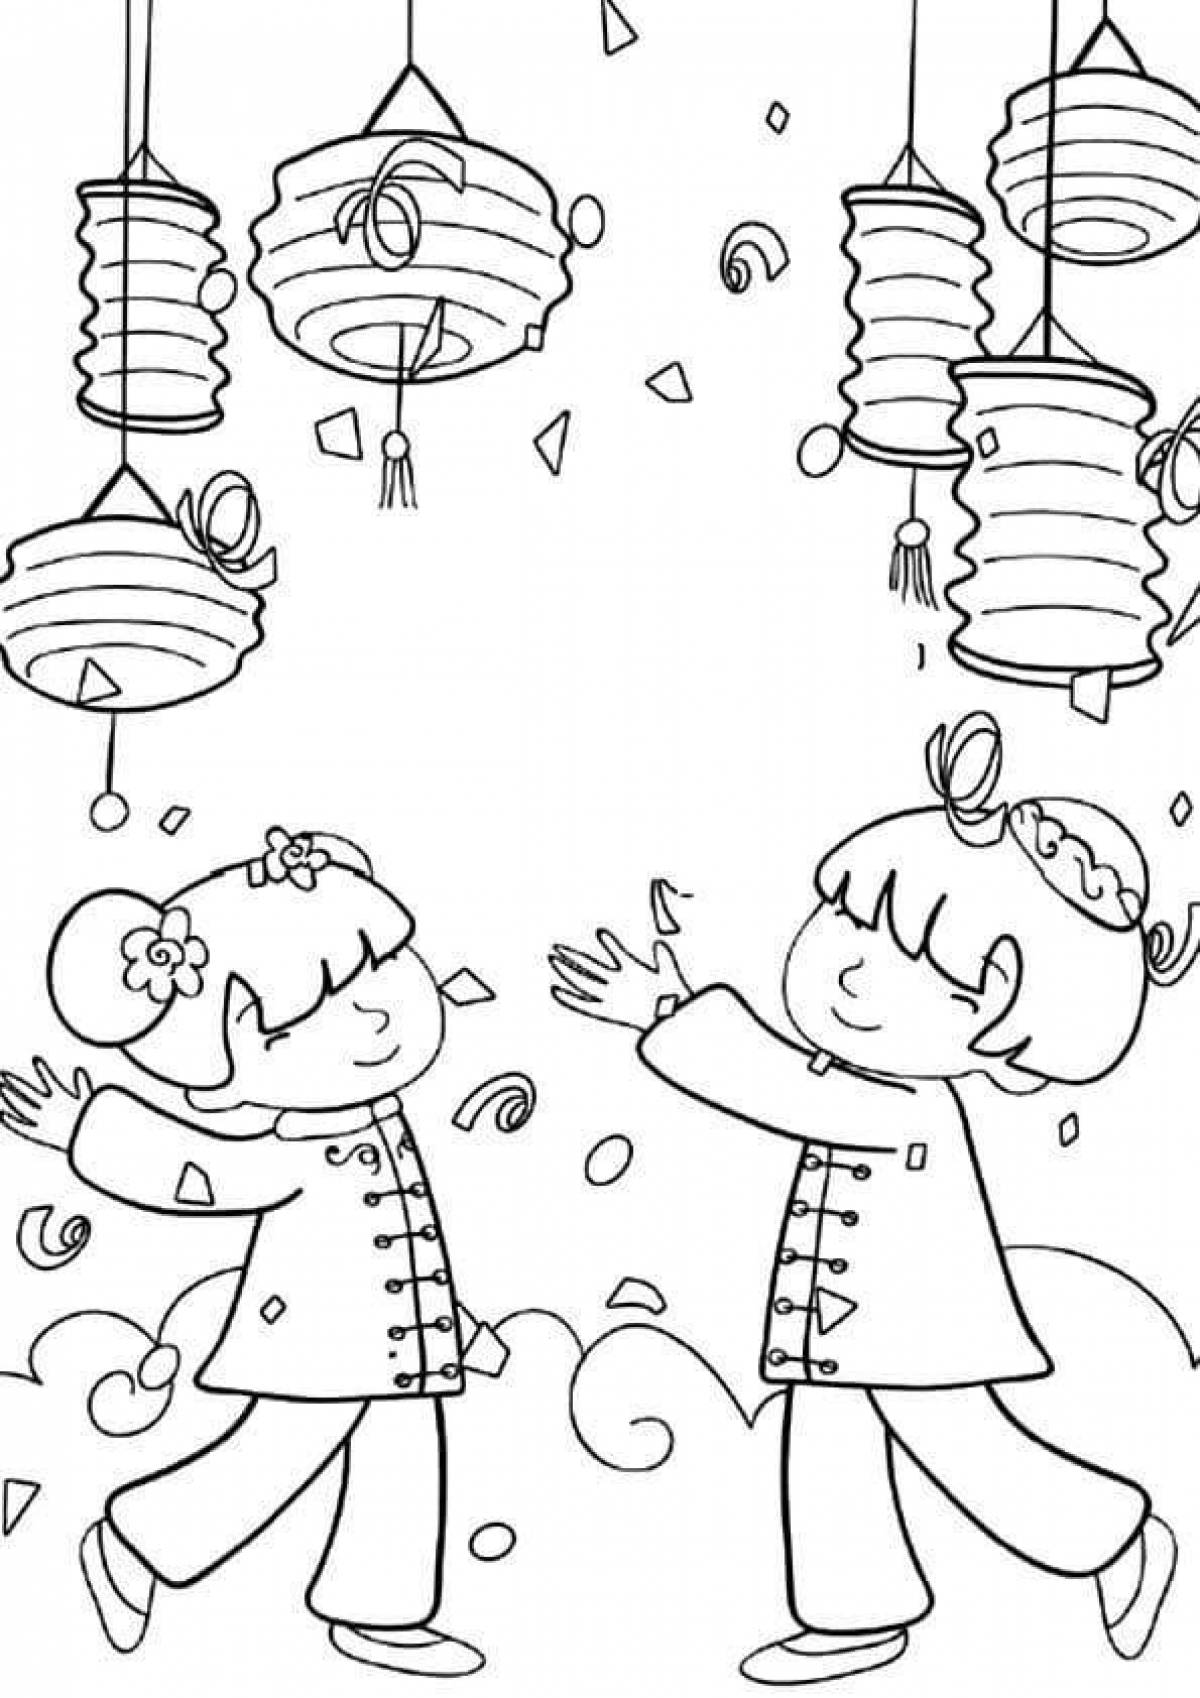 Great Chinese New Year coloring page